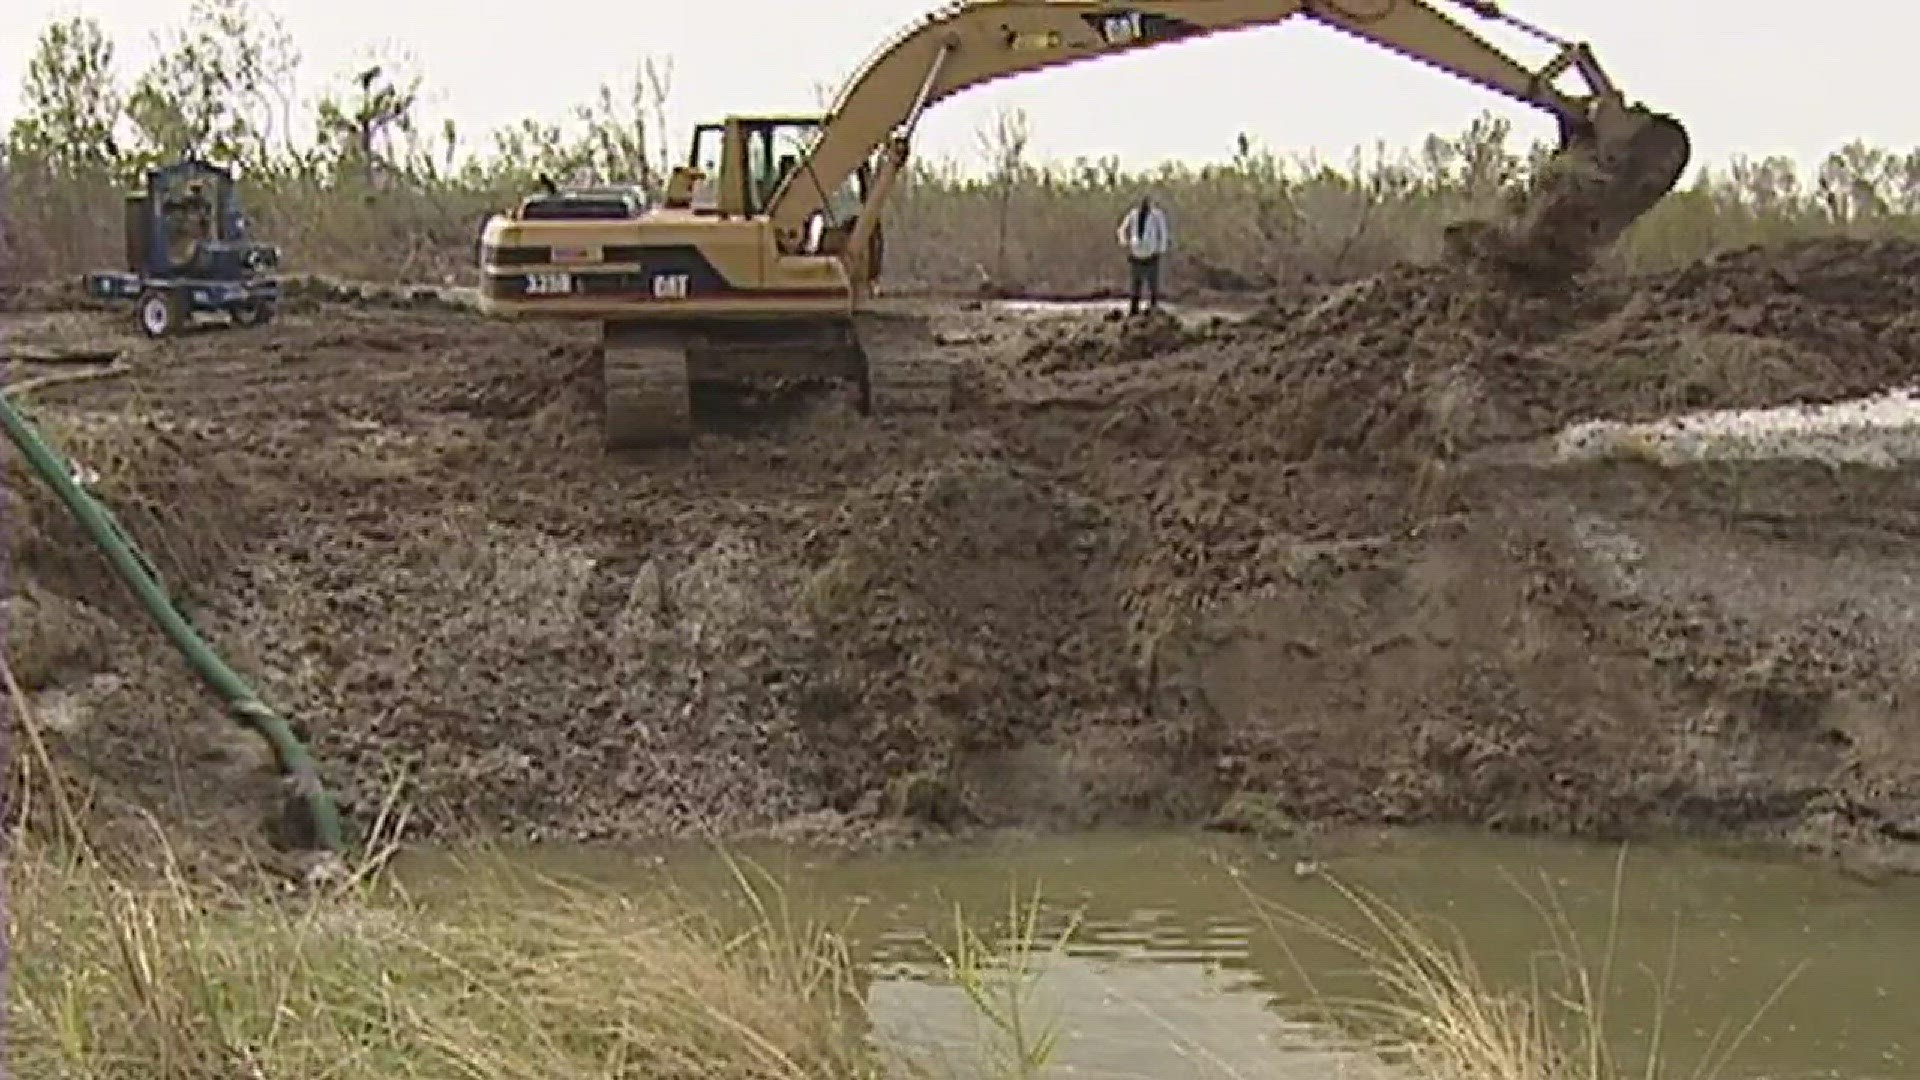 A New Orleans federal judge ruled Thursday that the Army Corps of Engineers must dig deep and pay the full $3 billion cost of restoring the wetlands destroyed by the Mississippi River Gulf Outlet, also known as MRGO.